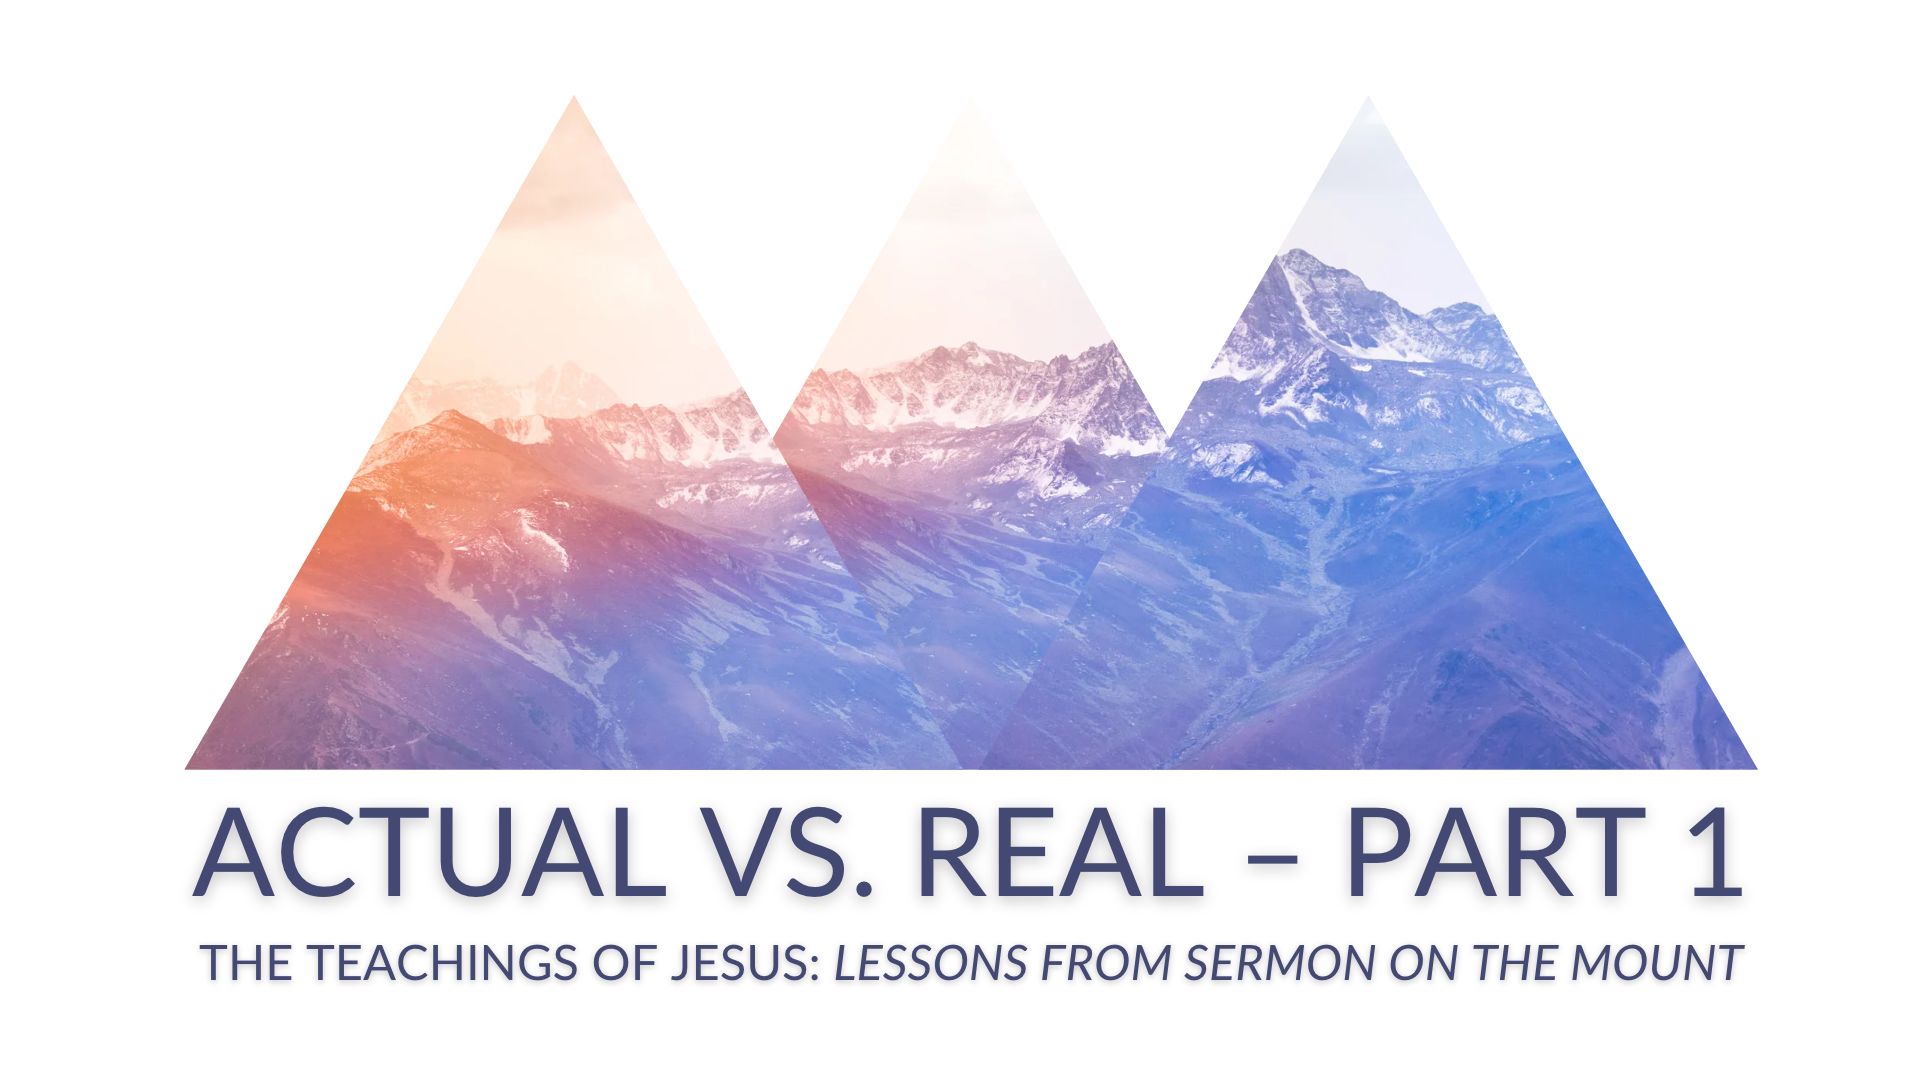 ACTUAL vs. REAL Part 1 - The Teachings of Jesus: Lessons from the Sermon on the Mount